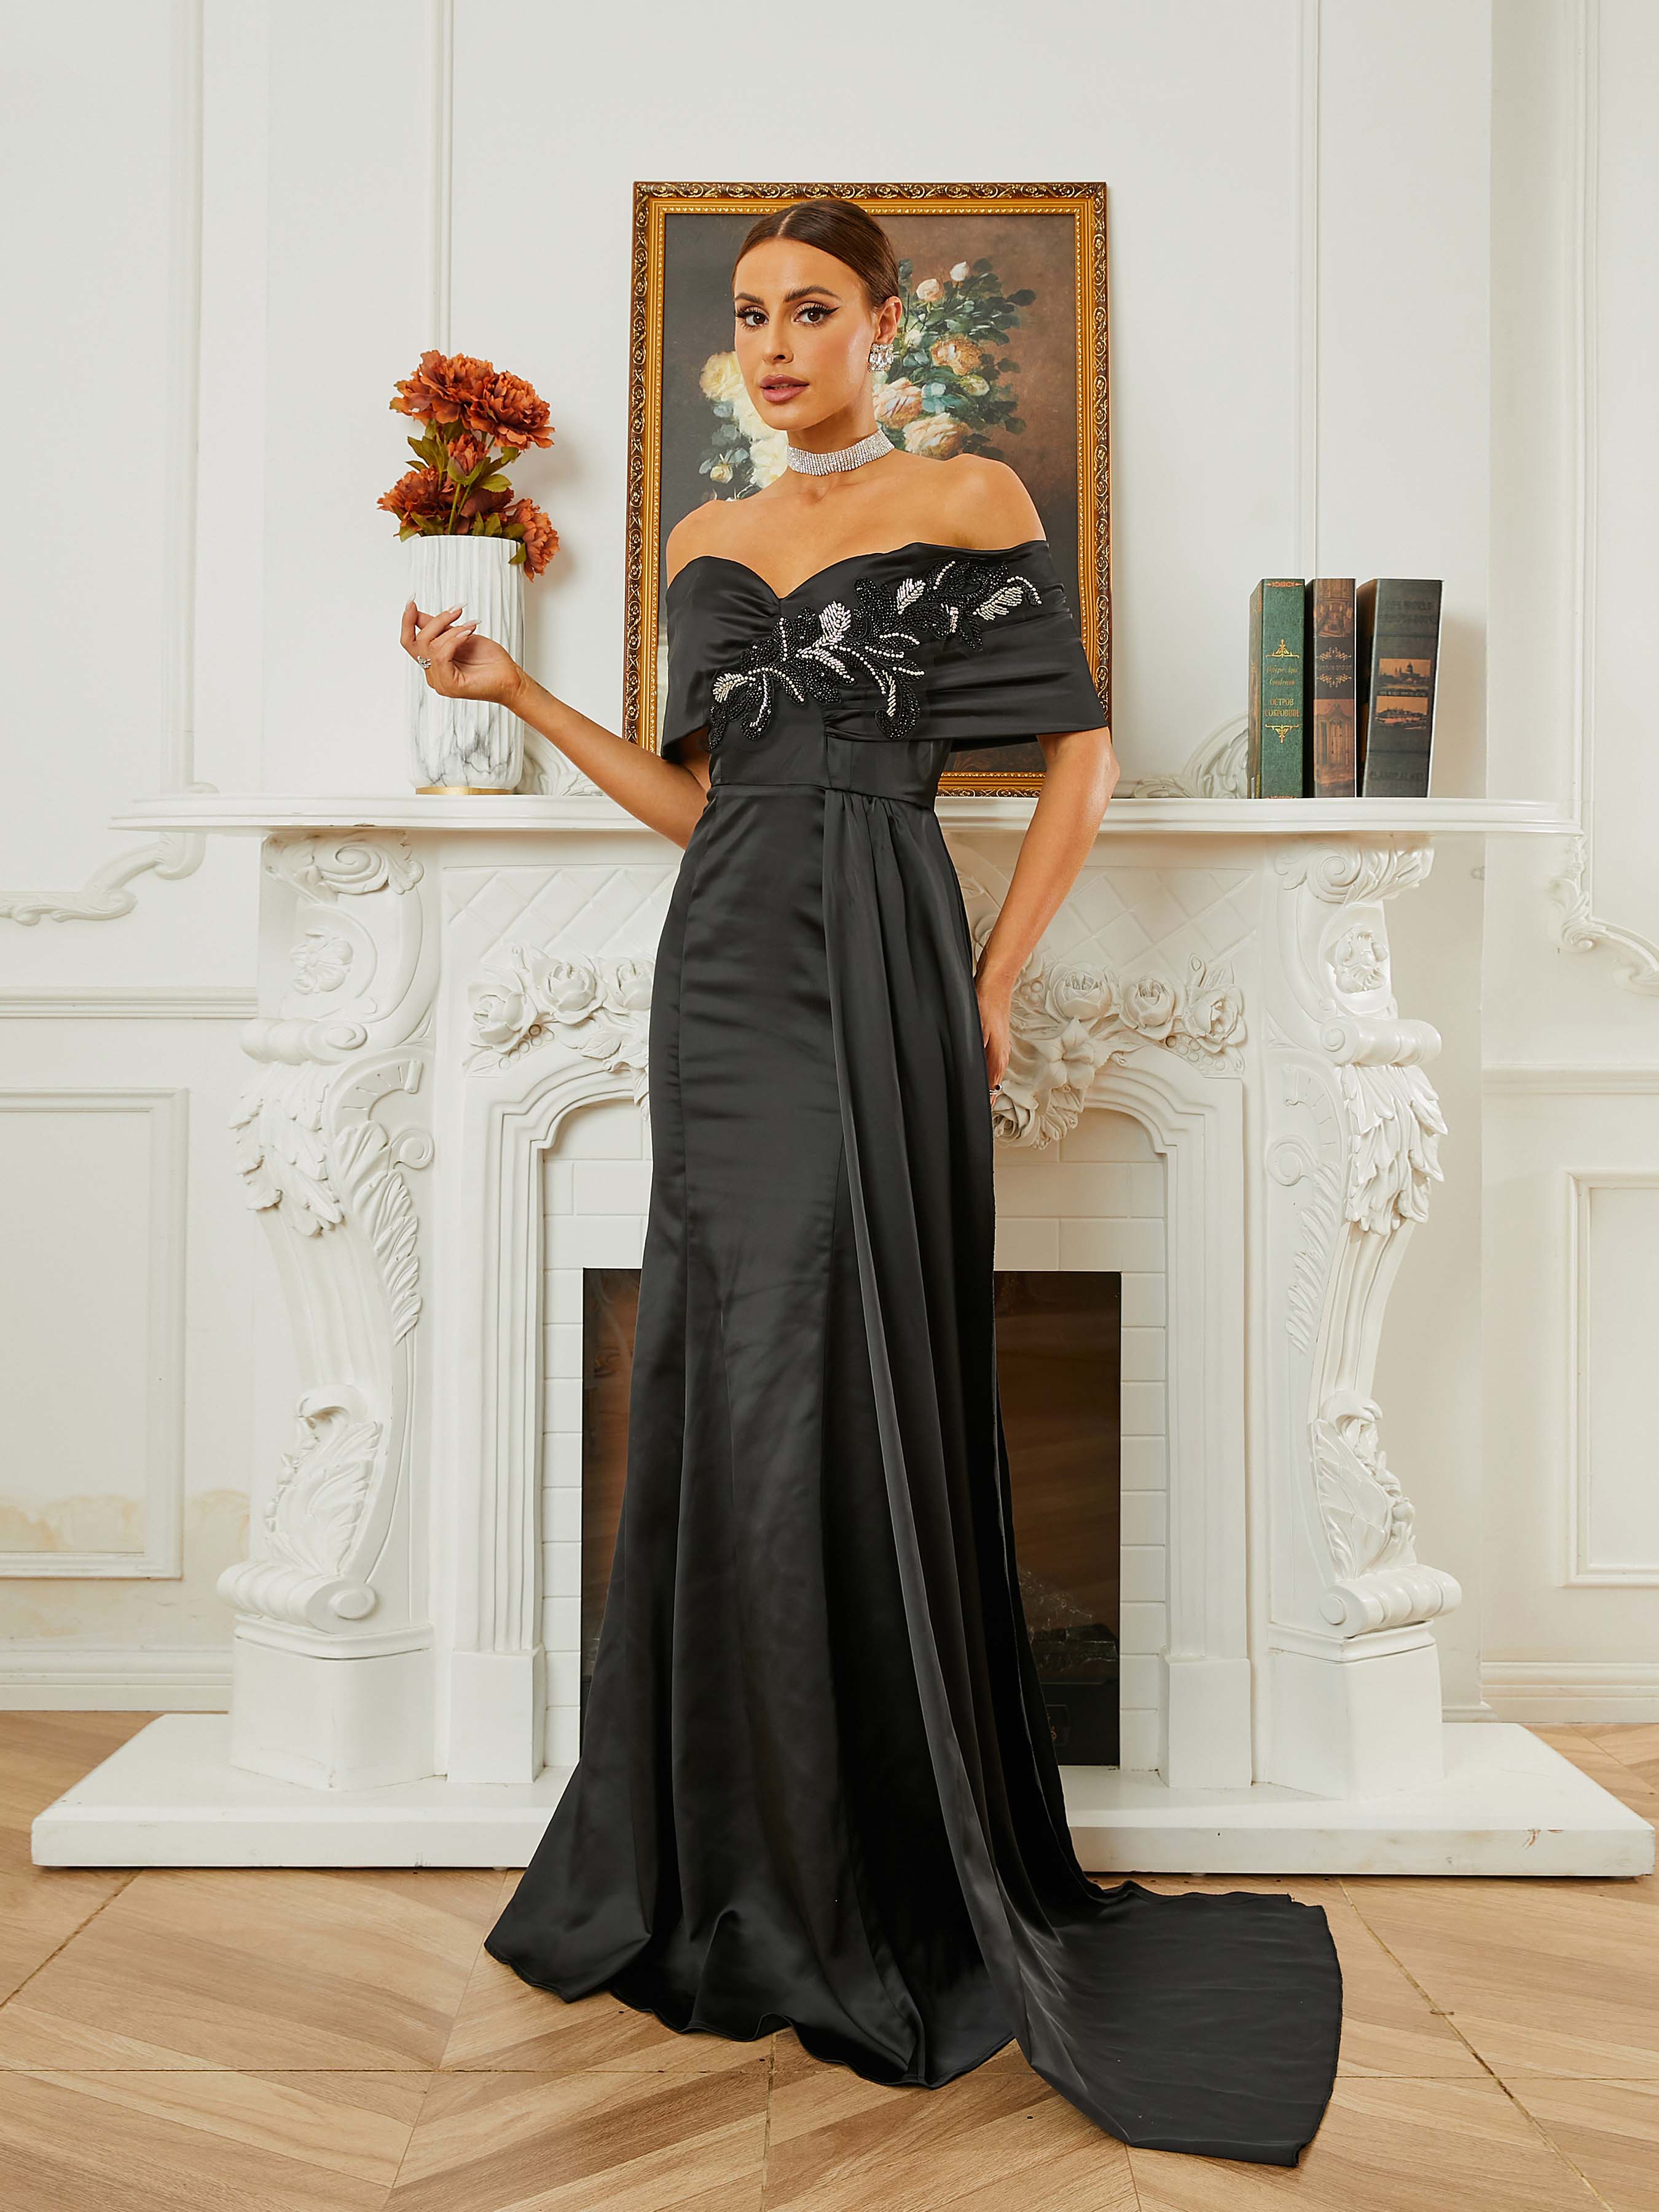 Strapless Off Shoulder Backless Mermaid Pleated Ribbon Evening Dress RM20468